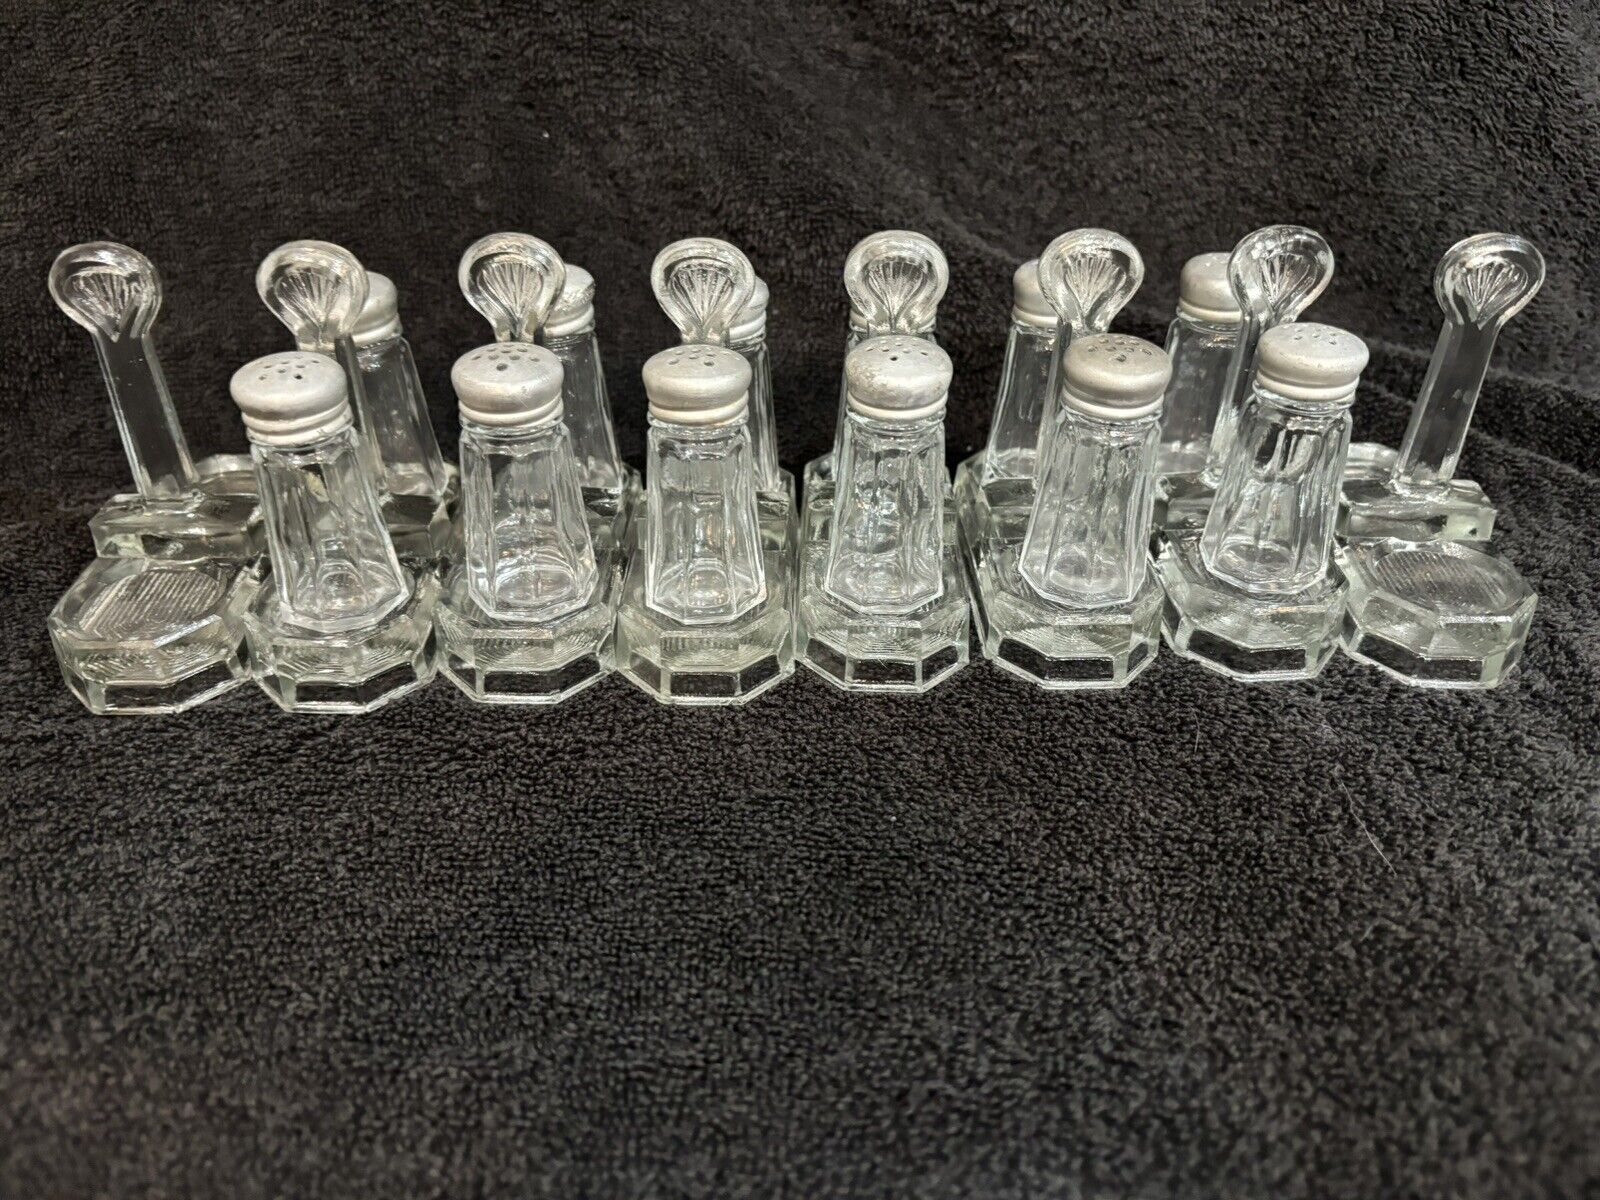 Lot Of 12 Vintage Salt & Pepper Shakers With Carrying Tray & 2 Extra Tray